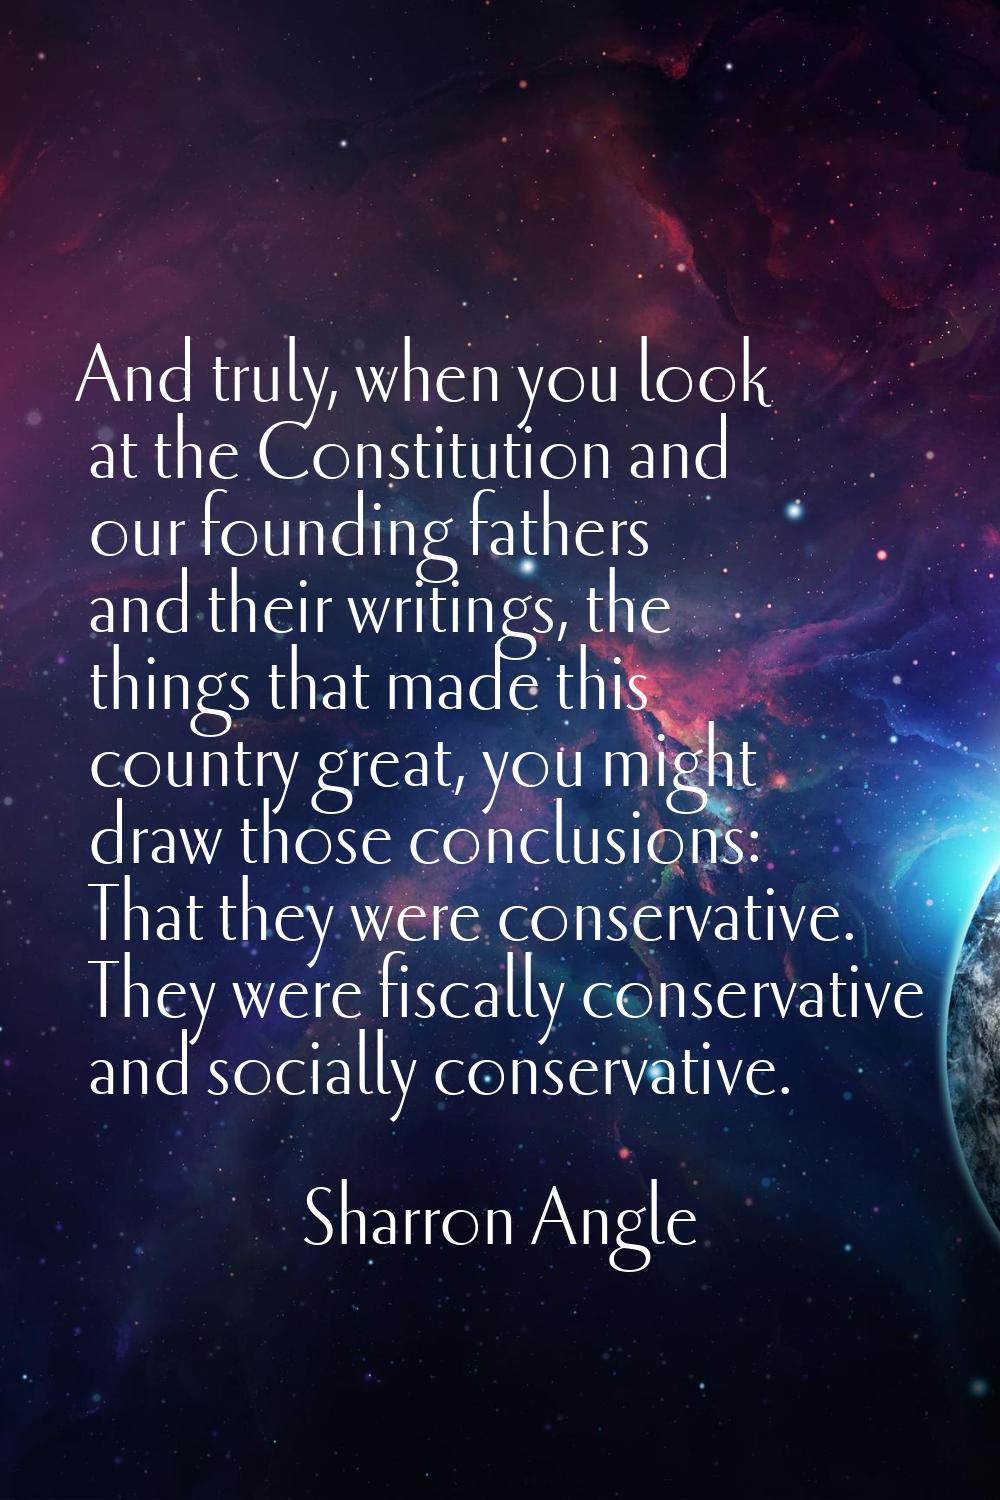 And truly, when you look at the Constitution and our founding fathers and their writings, the thing